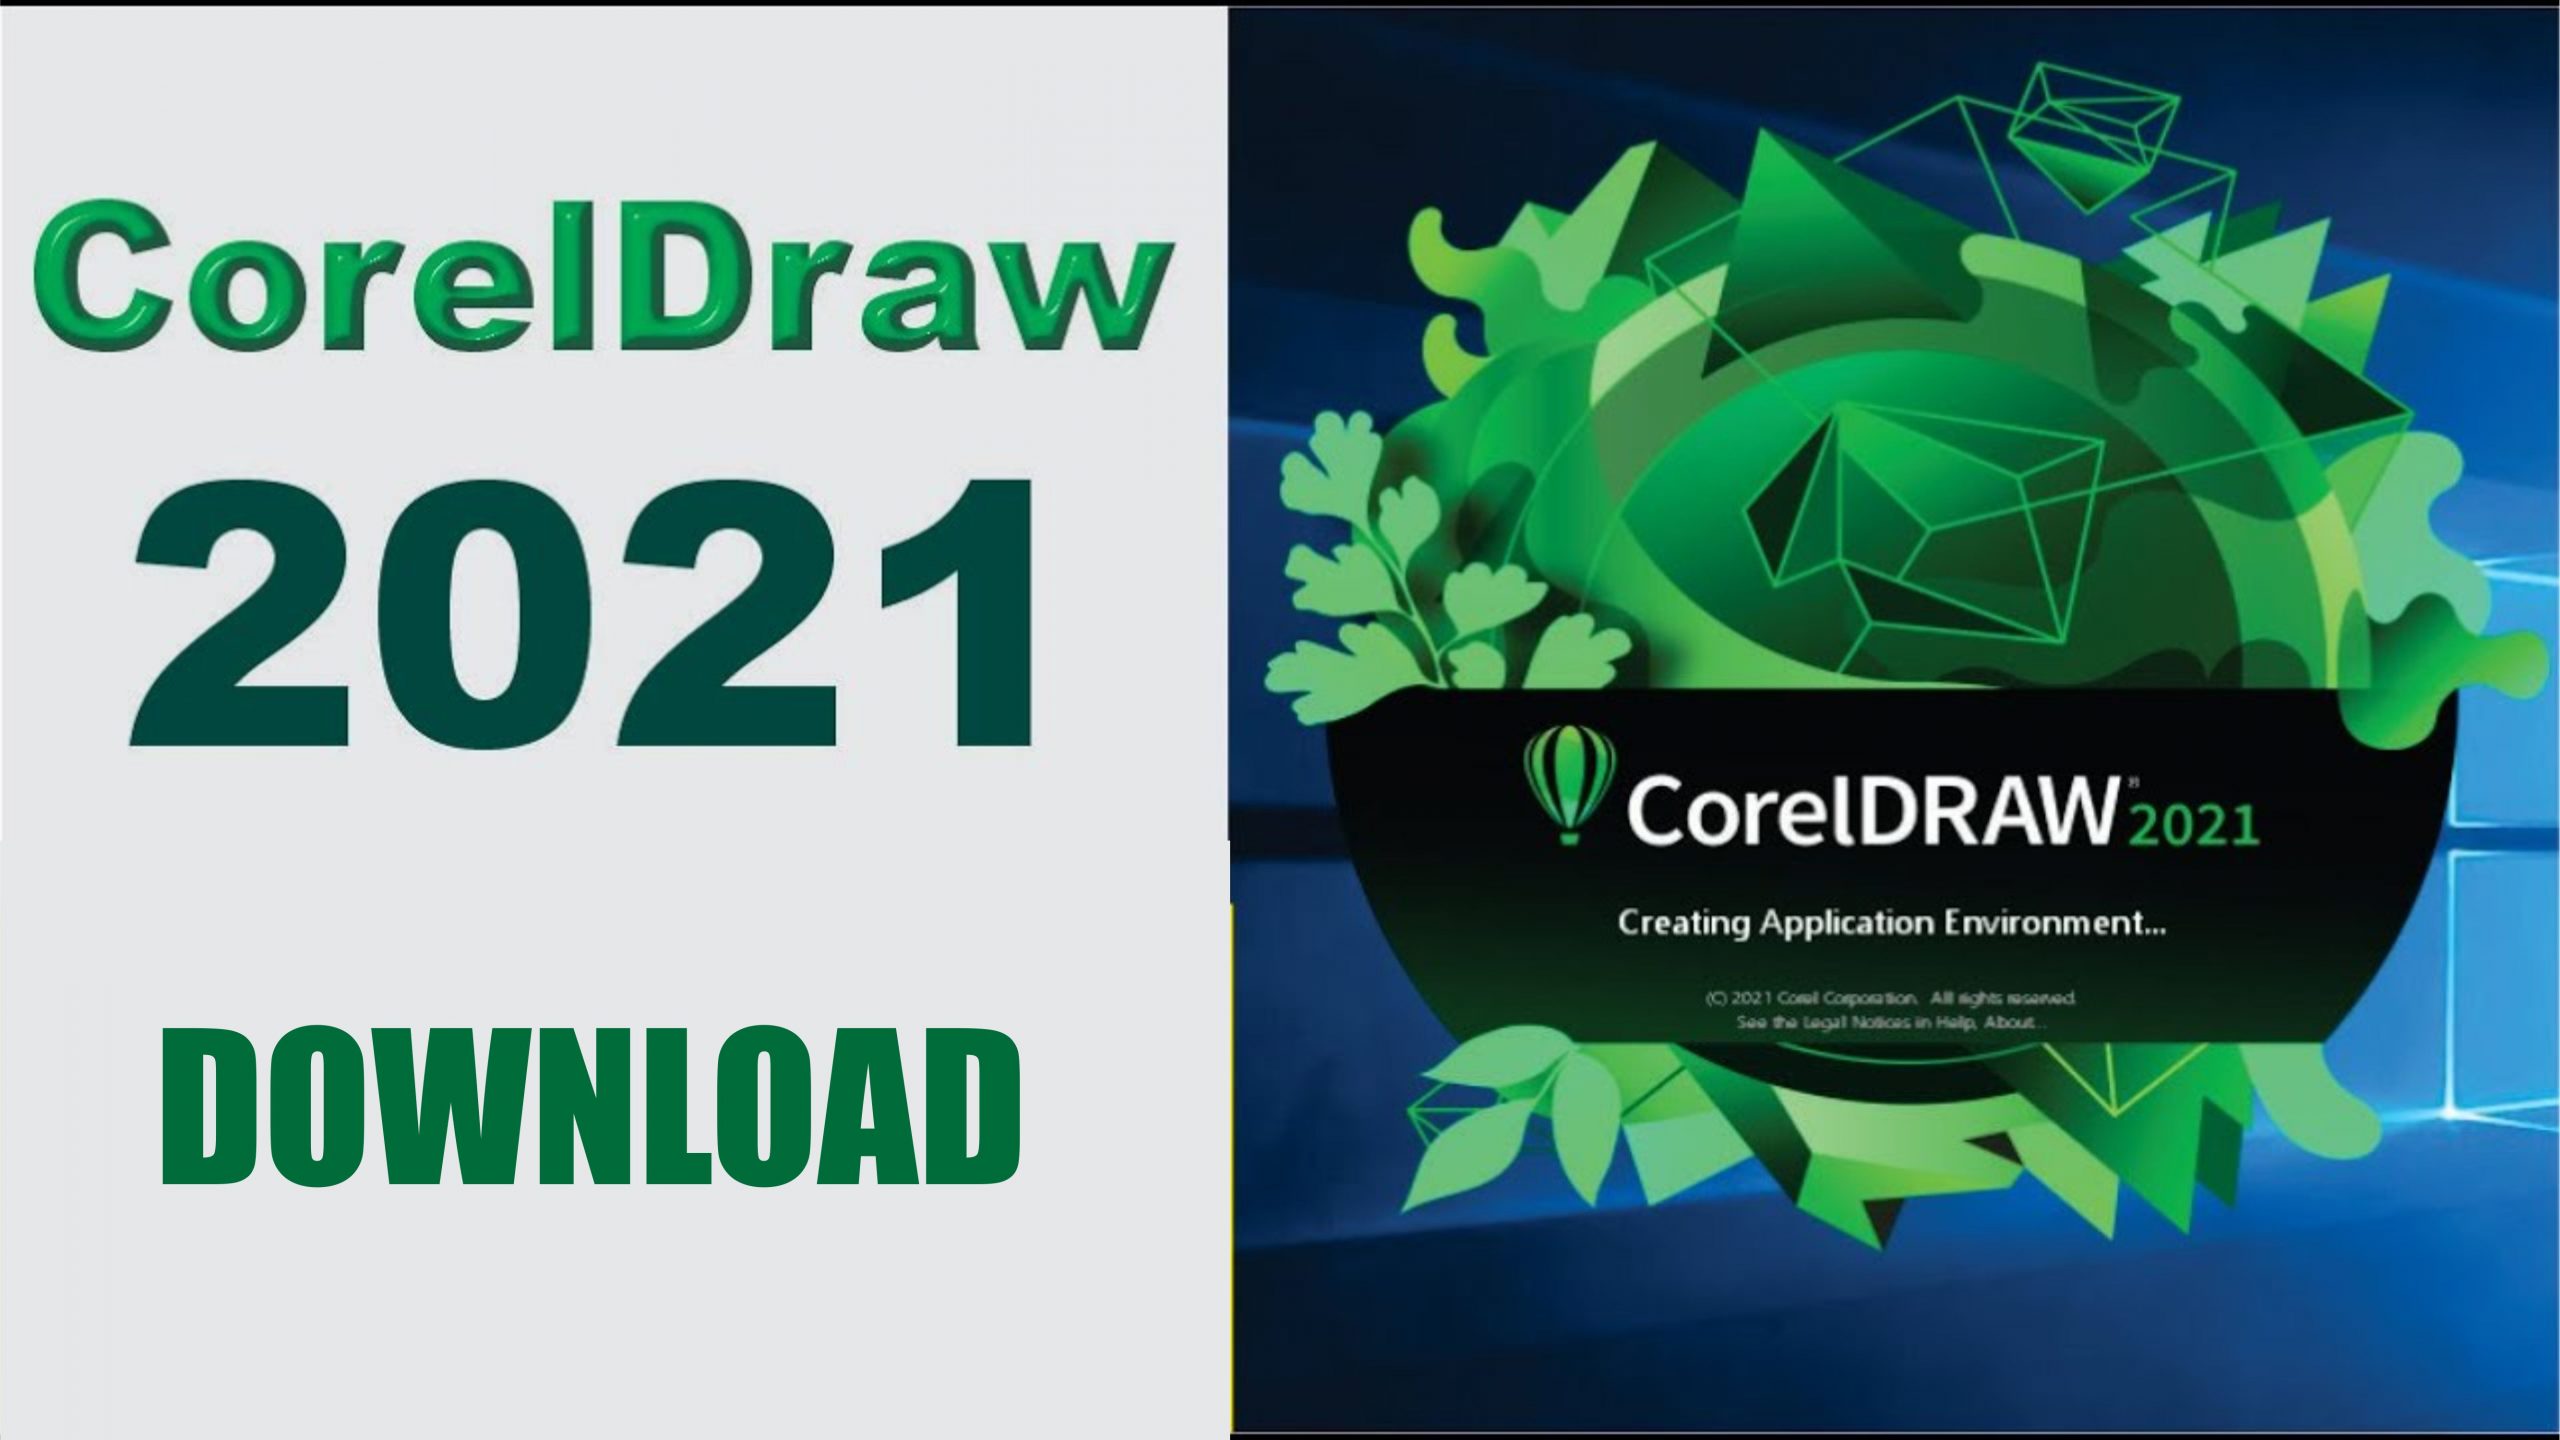 coreldraw software download for pc free